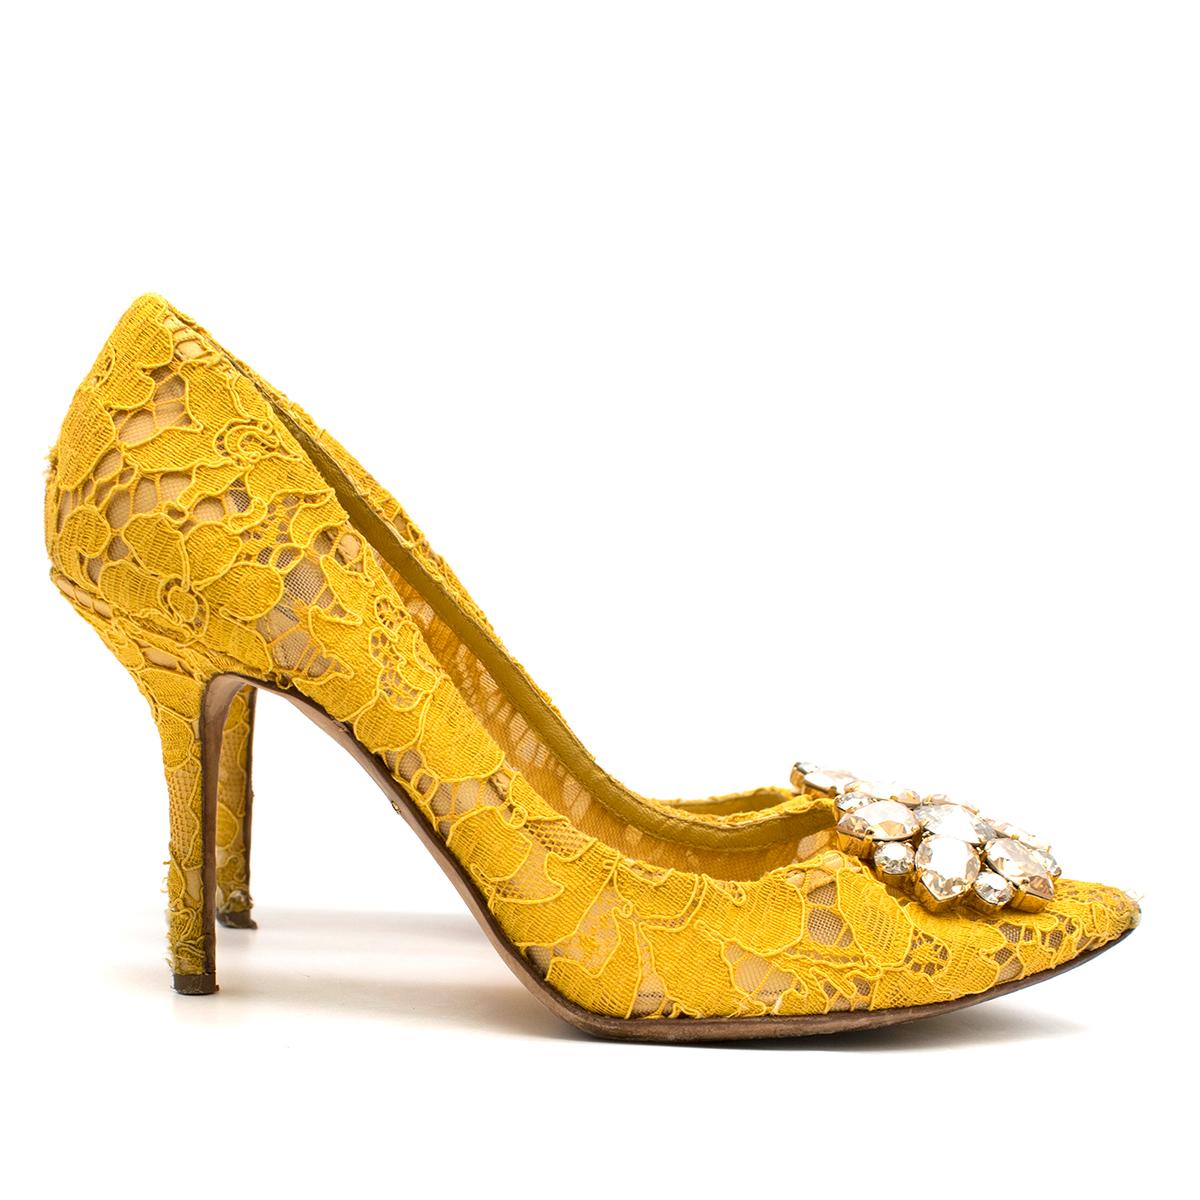 Dolce & Gabbana Bellucci Taormina Yellow Lace Pumps

-Yellow, laced
-Crystal toe detailing 
-Pointed toe
-Yellow leather insole

Please note, these items are pre-owned and may show some signs of storage, even when unworn and unused. This is